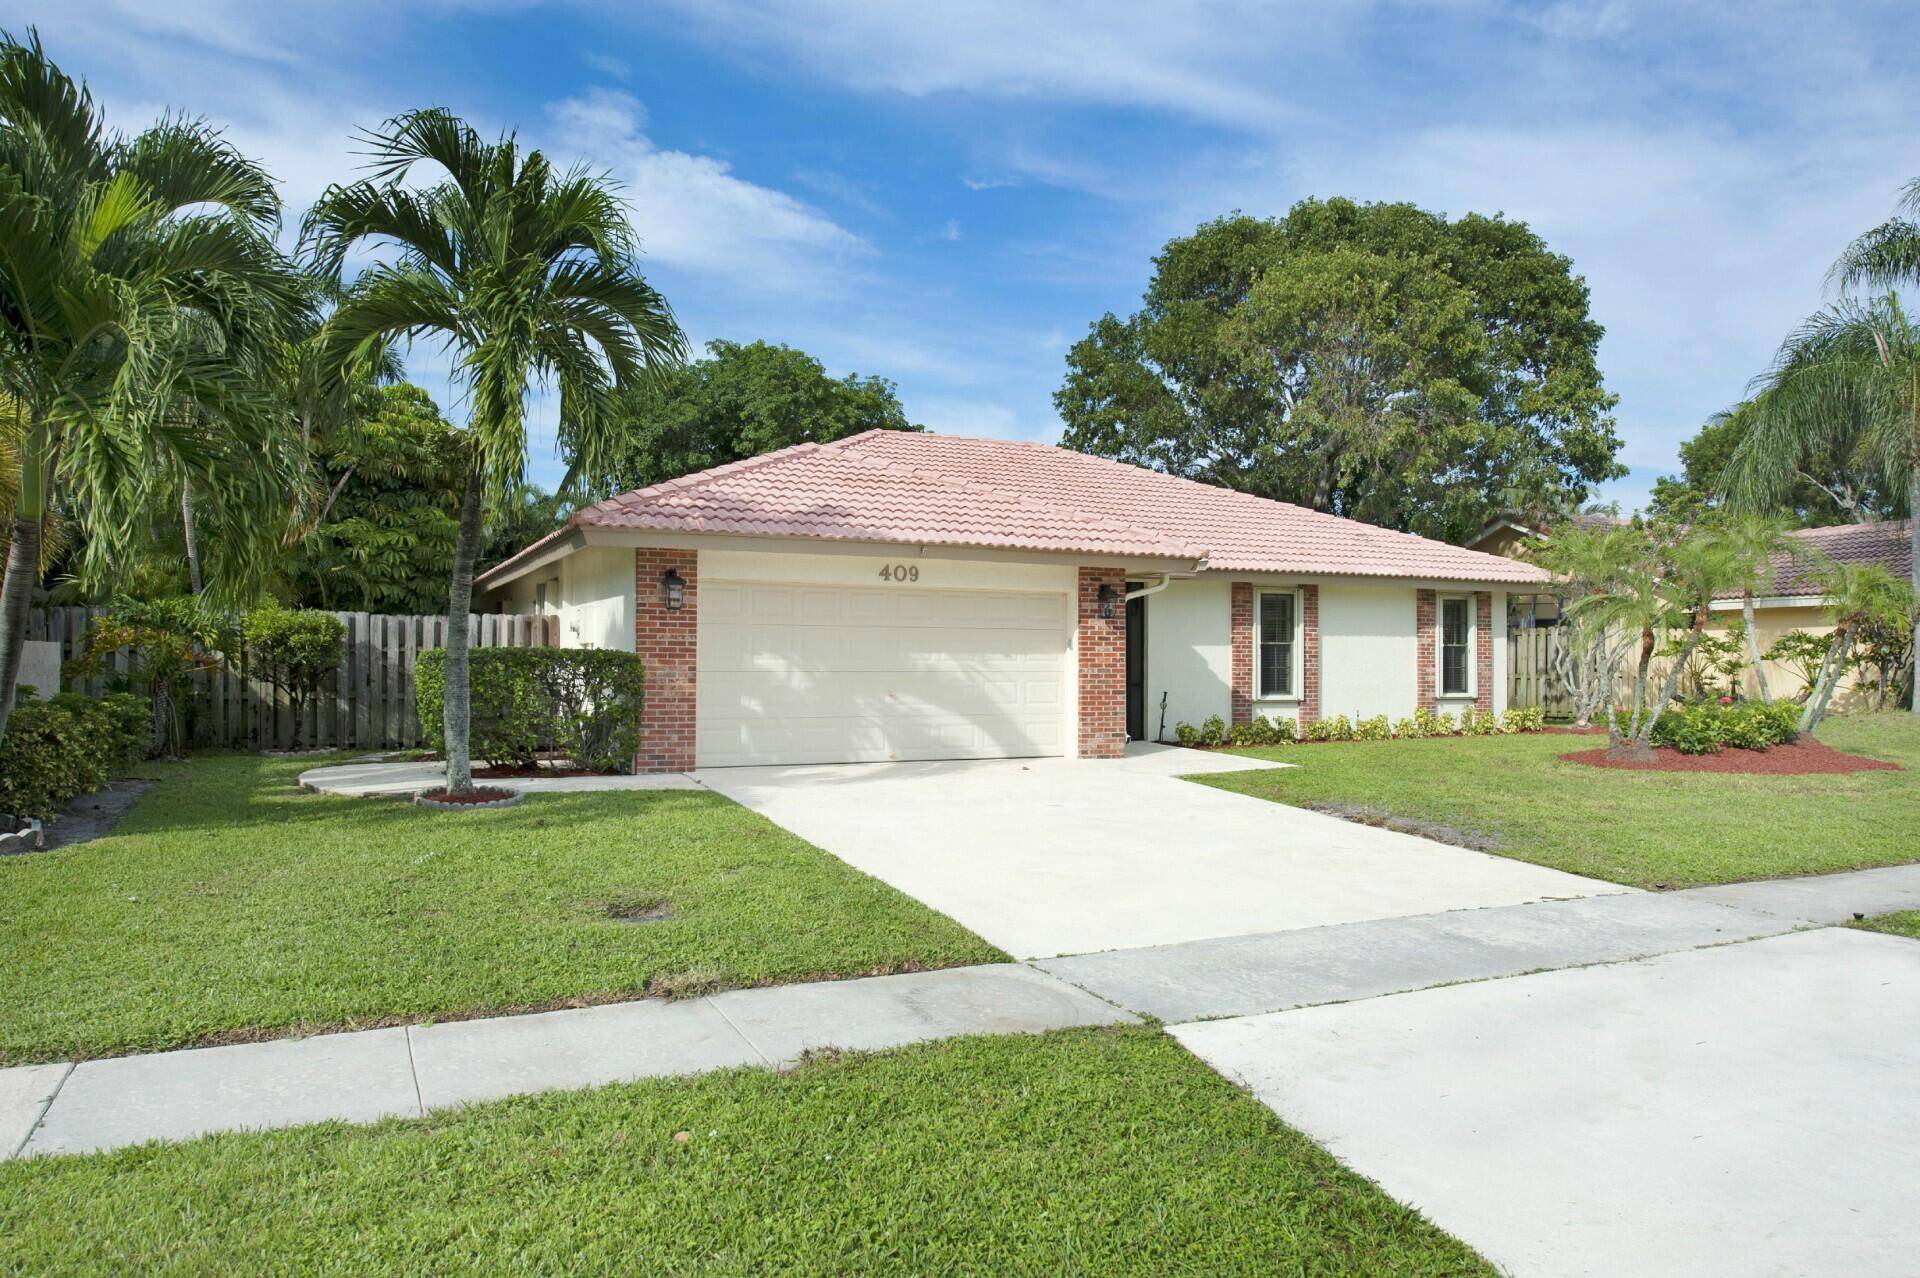 RARE OPPORTUNITY ! Located in Hidden Lakes in East Boca Raton.